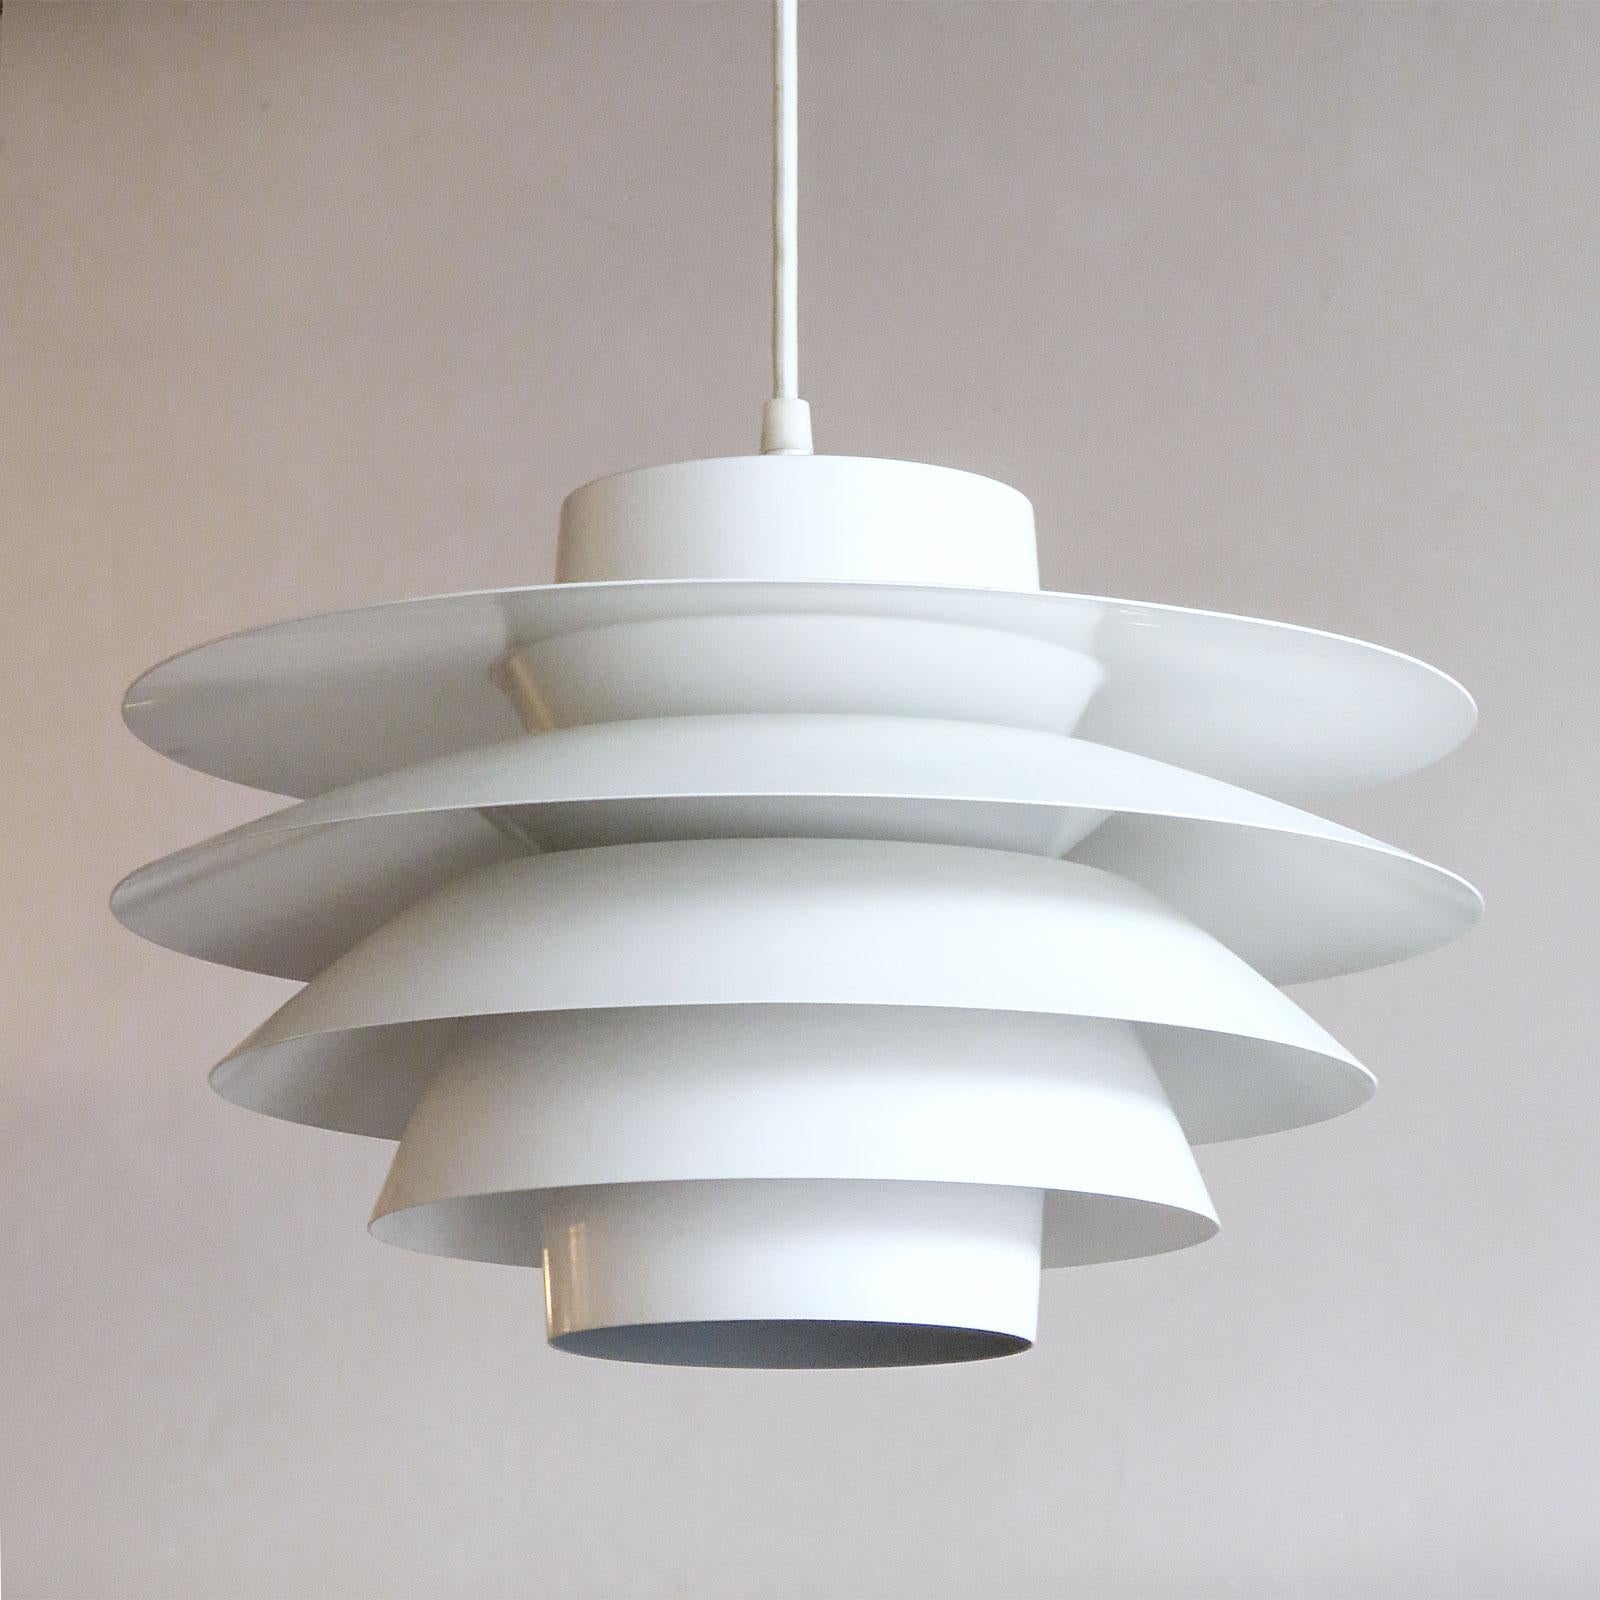 Wonderful tiered 'Verona' pendant, designed by Sven Middleboe for Nordisk Solar Compagni in Denmark in 1962. This all white, five ringed aluminum pendant is perfect for above a dining table, providing a nice soft diffused light, marked. One E26